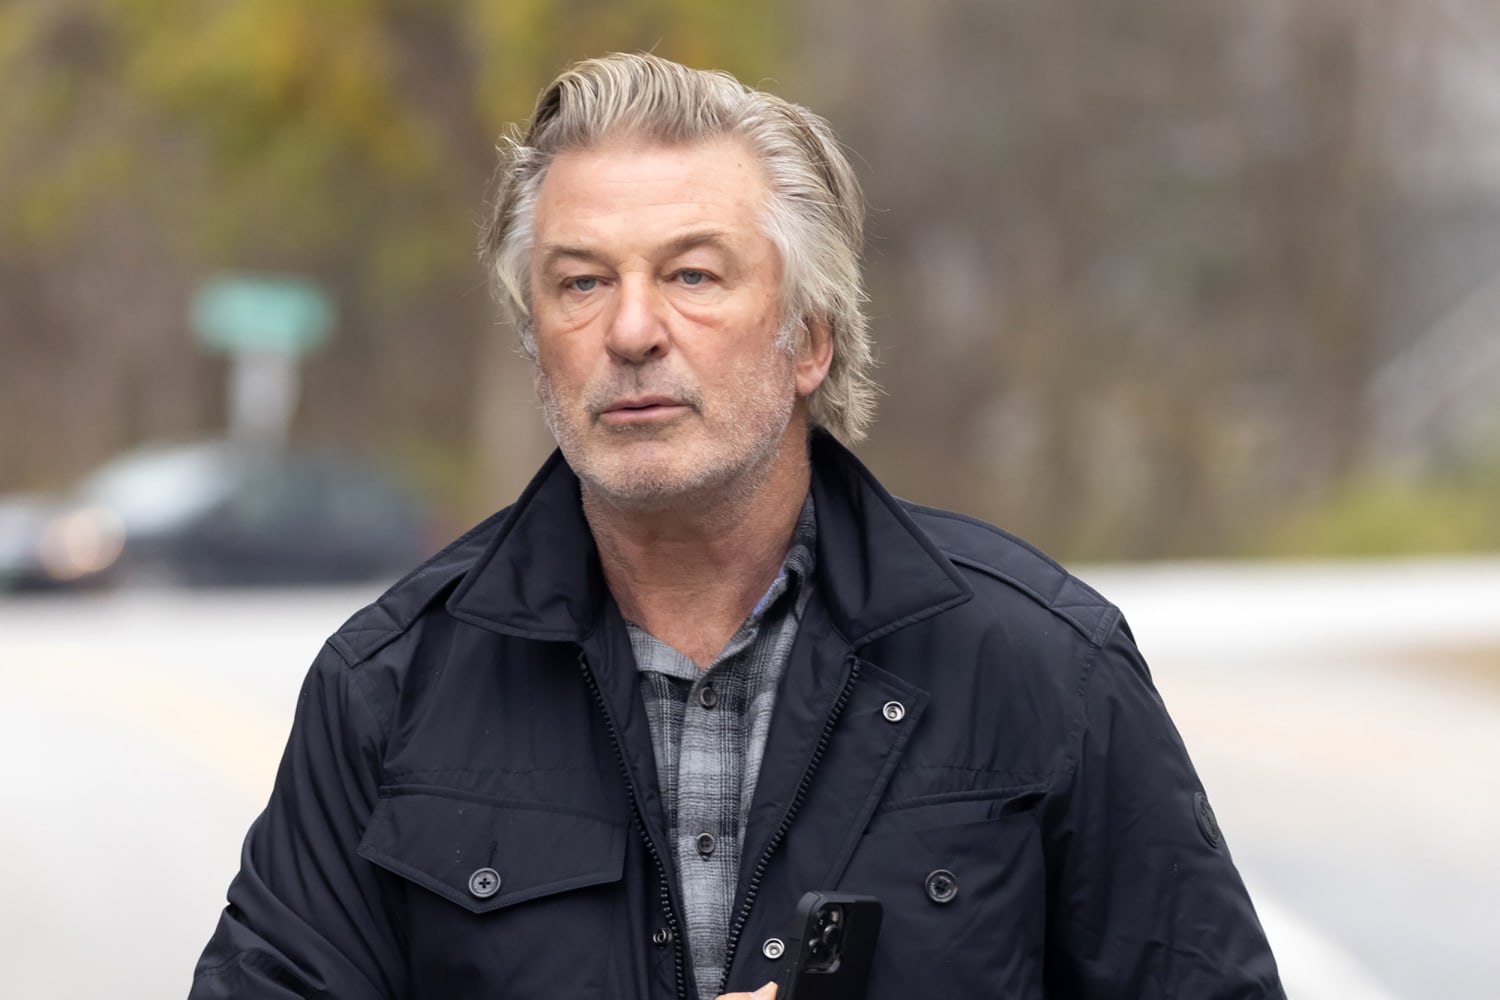 Alec Baldwin receives hip replacement after suffering 'intense chronic pain,' wife says